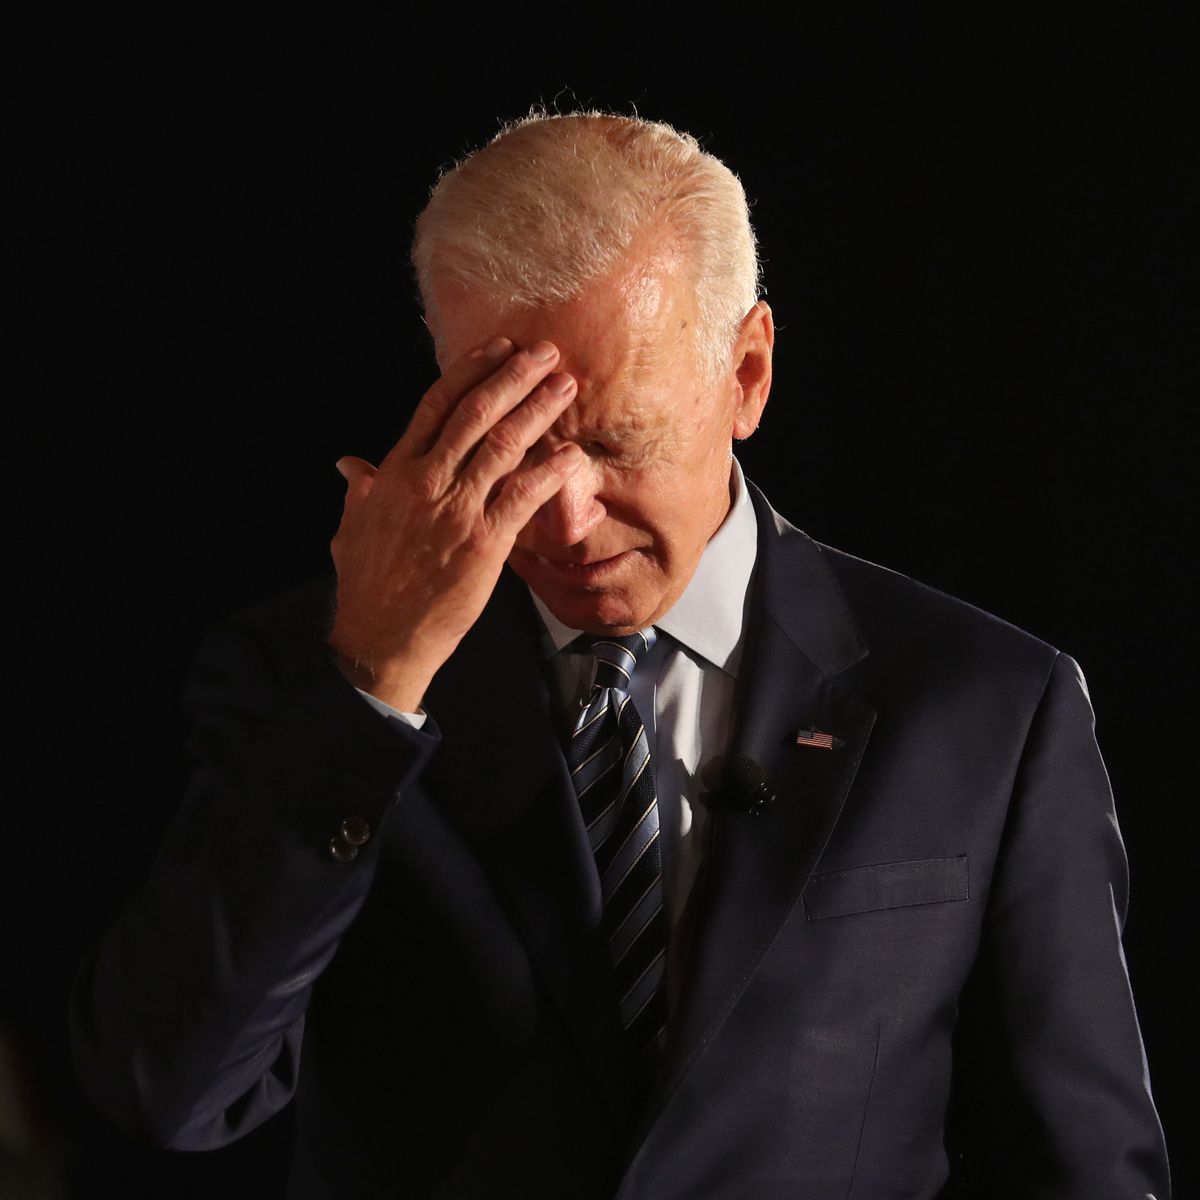 what are joe biden;s issues - Biden|President|Joe|Years|Trump|Delaware|Vice|Time|Obama|Senate|States|Law|Age|Campaign|Election|Administration|Family|House|Senator|Office|School|Wife|People|Hunter|University|Act|State|Year|Life|Party|Committee|Children|Beau|Daughter|War|Jill|Day|Facts|Americans|Presidency|Joe Biden|United States|Vice President|White House|Law School|President Trump|Foreign Relations Committee|Donald Trump|President Biden|Presidential Campaign|Presidential Election|Democratic Party|Syracuse University|United Nations|Net Worth|Barack Obama|Judiciary Committee|Neilia Hunter|U.S. Senate|Hillary Clinton|New York Times|Obama Administration|Empty Store Shelves|Systemic Racism|Castle County Council|Archmere Academy|U.S. Senator|Vice Presidency|Second Term|Biden Administration